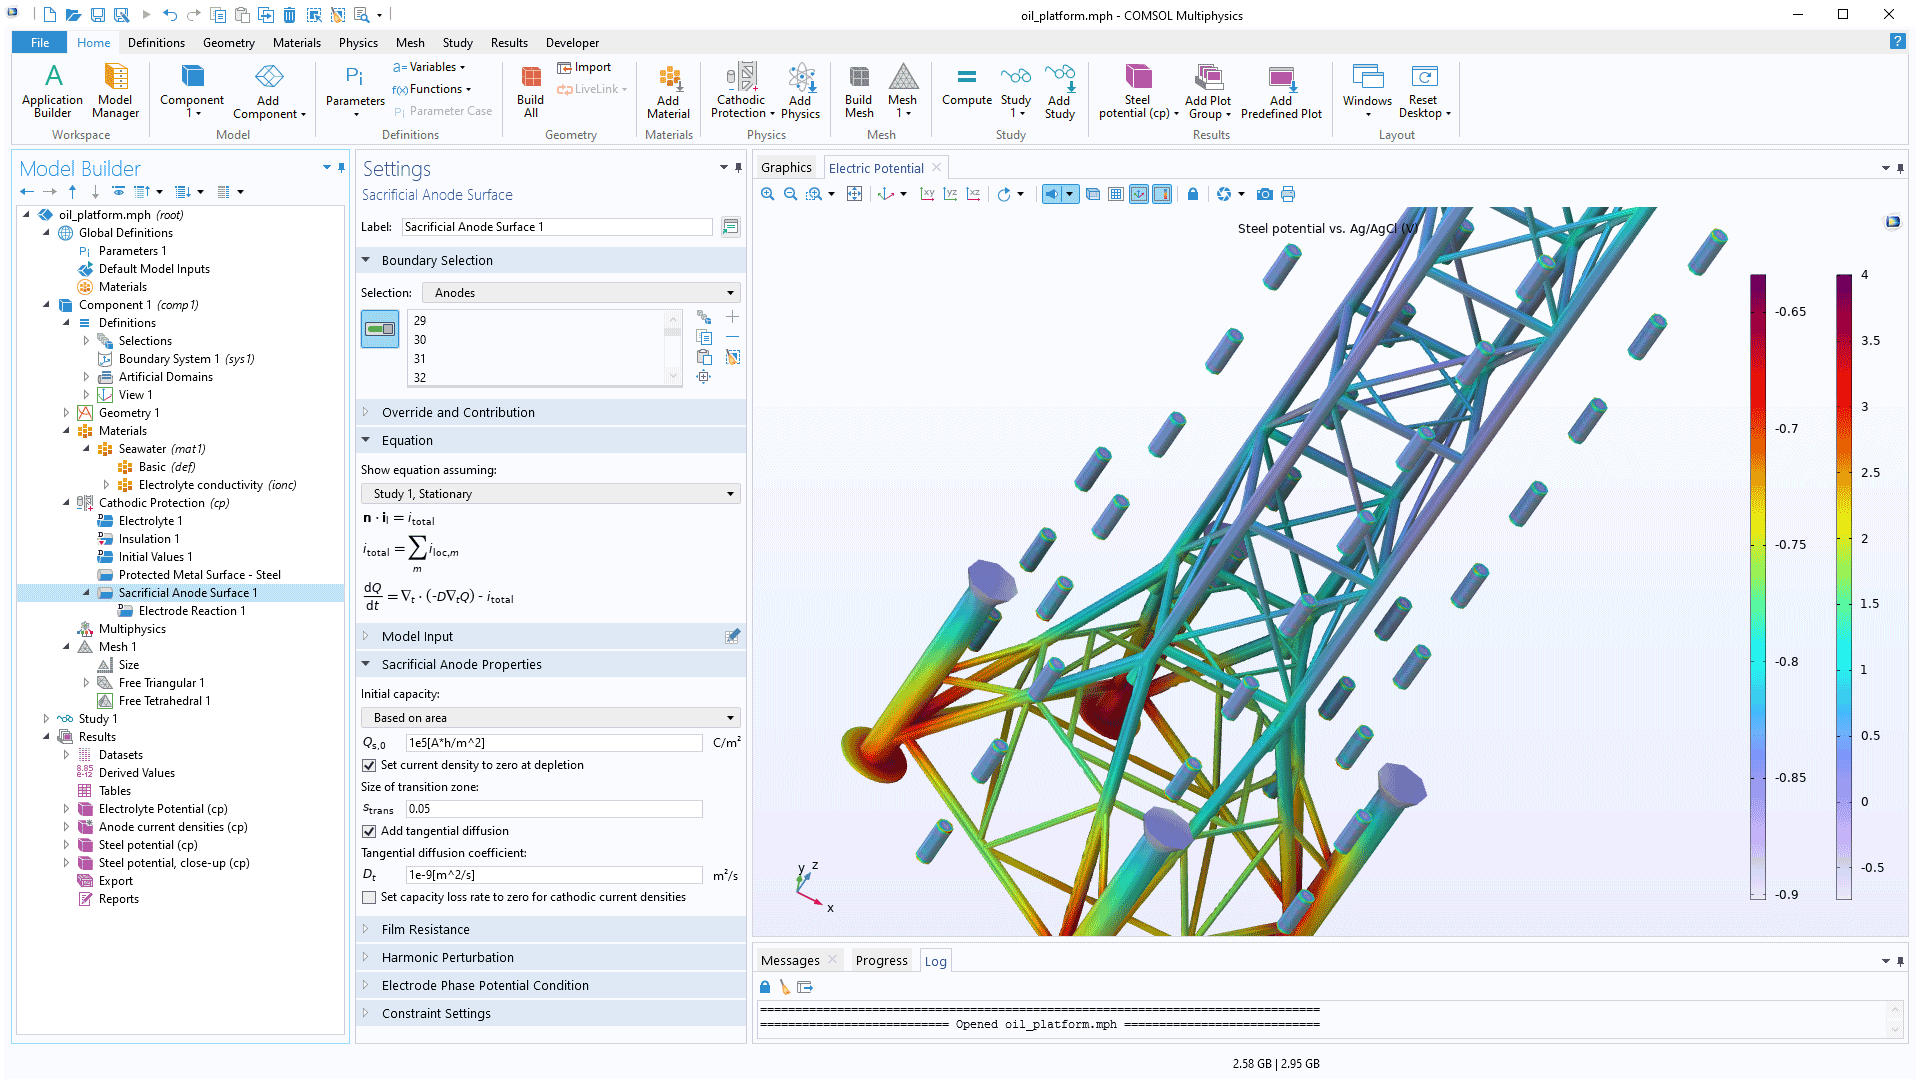 The COMSOL Multiphysics UI showing the Model Builder with the Sacrificial Anode Surface node highlighted, the corresponding Settings window, and an oil platform model in the Graphics window.